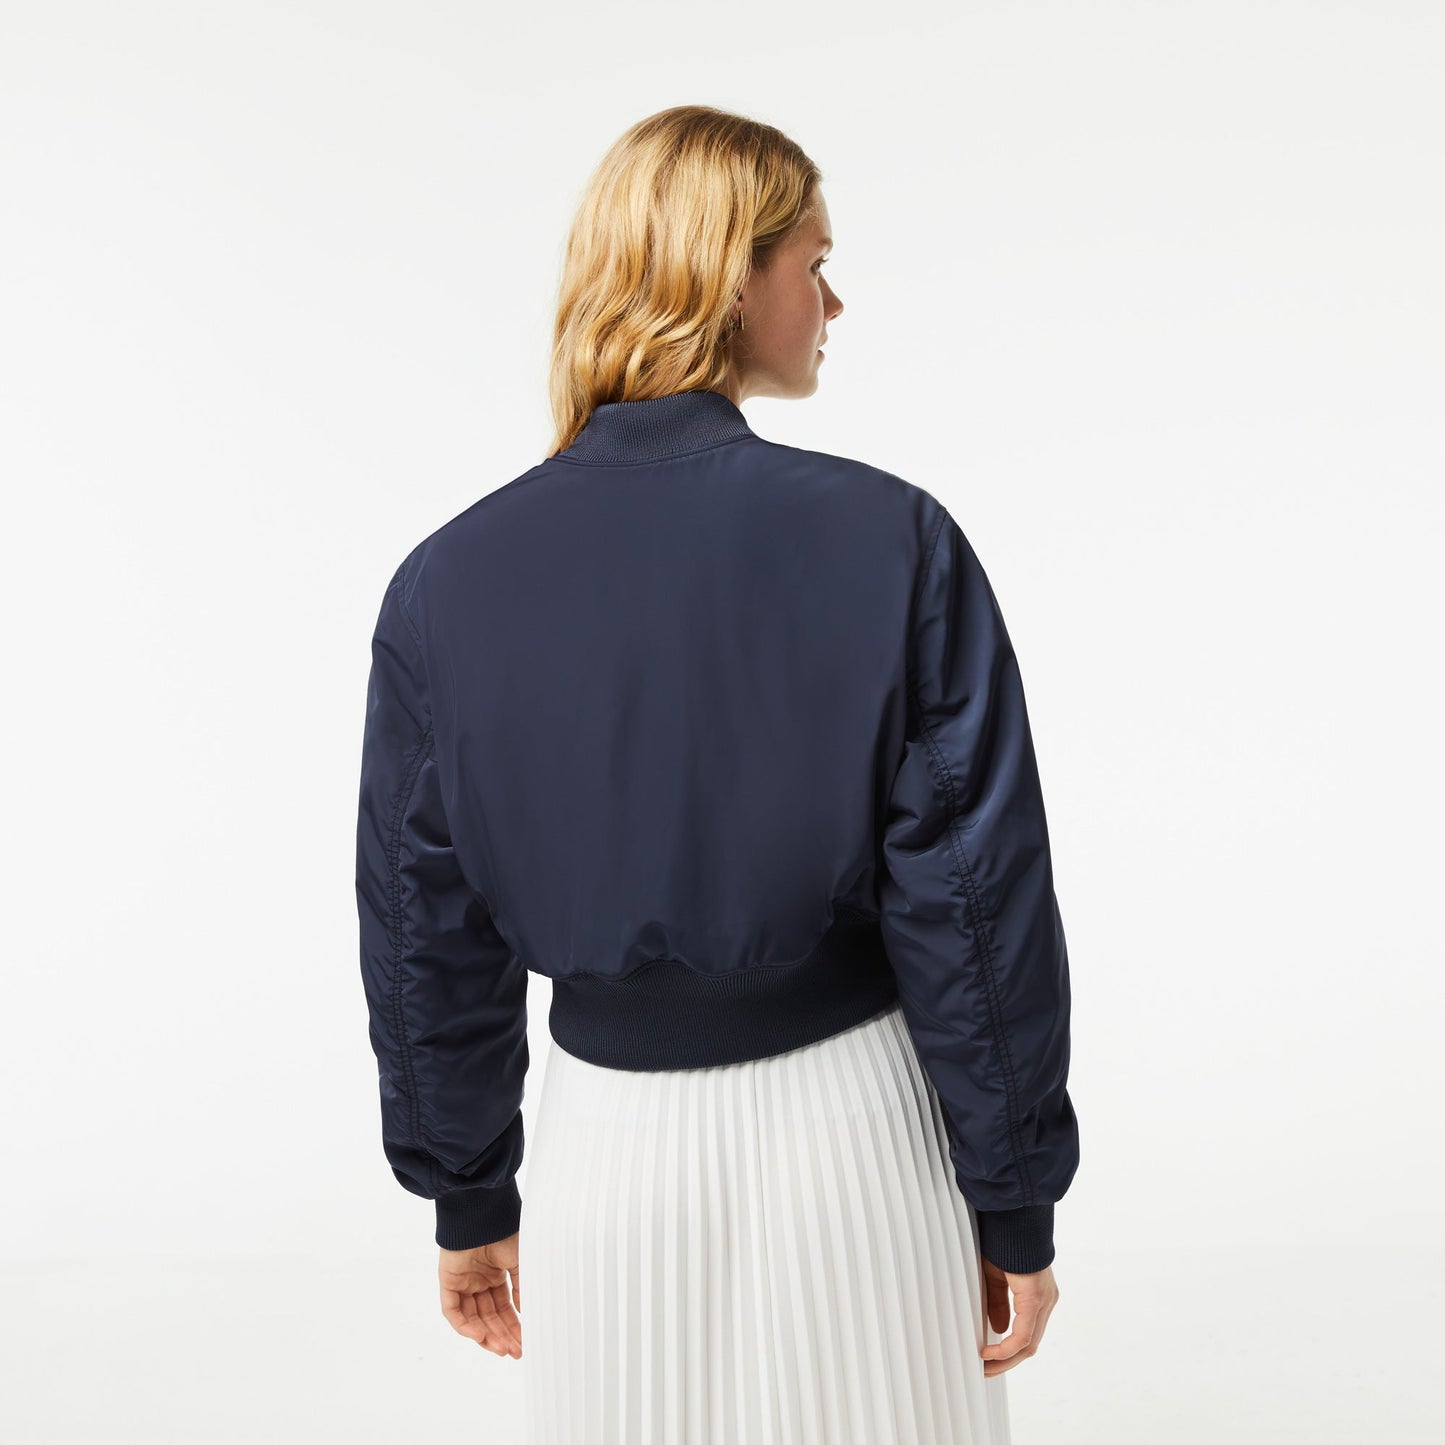 Women’s Lacoste Bomber Jacket with Ribbed Band Details  - BF5885